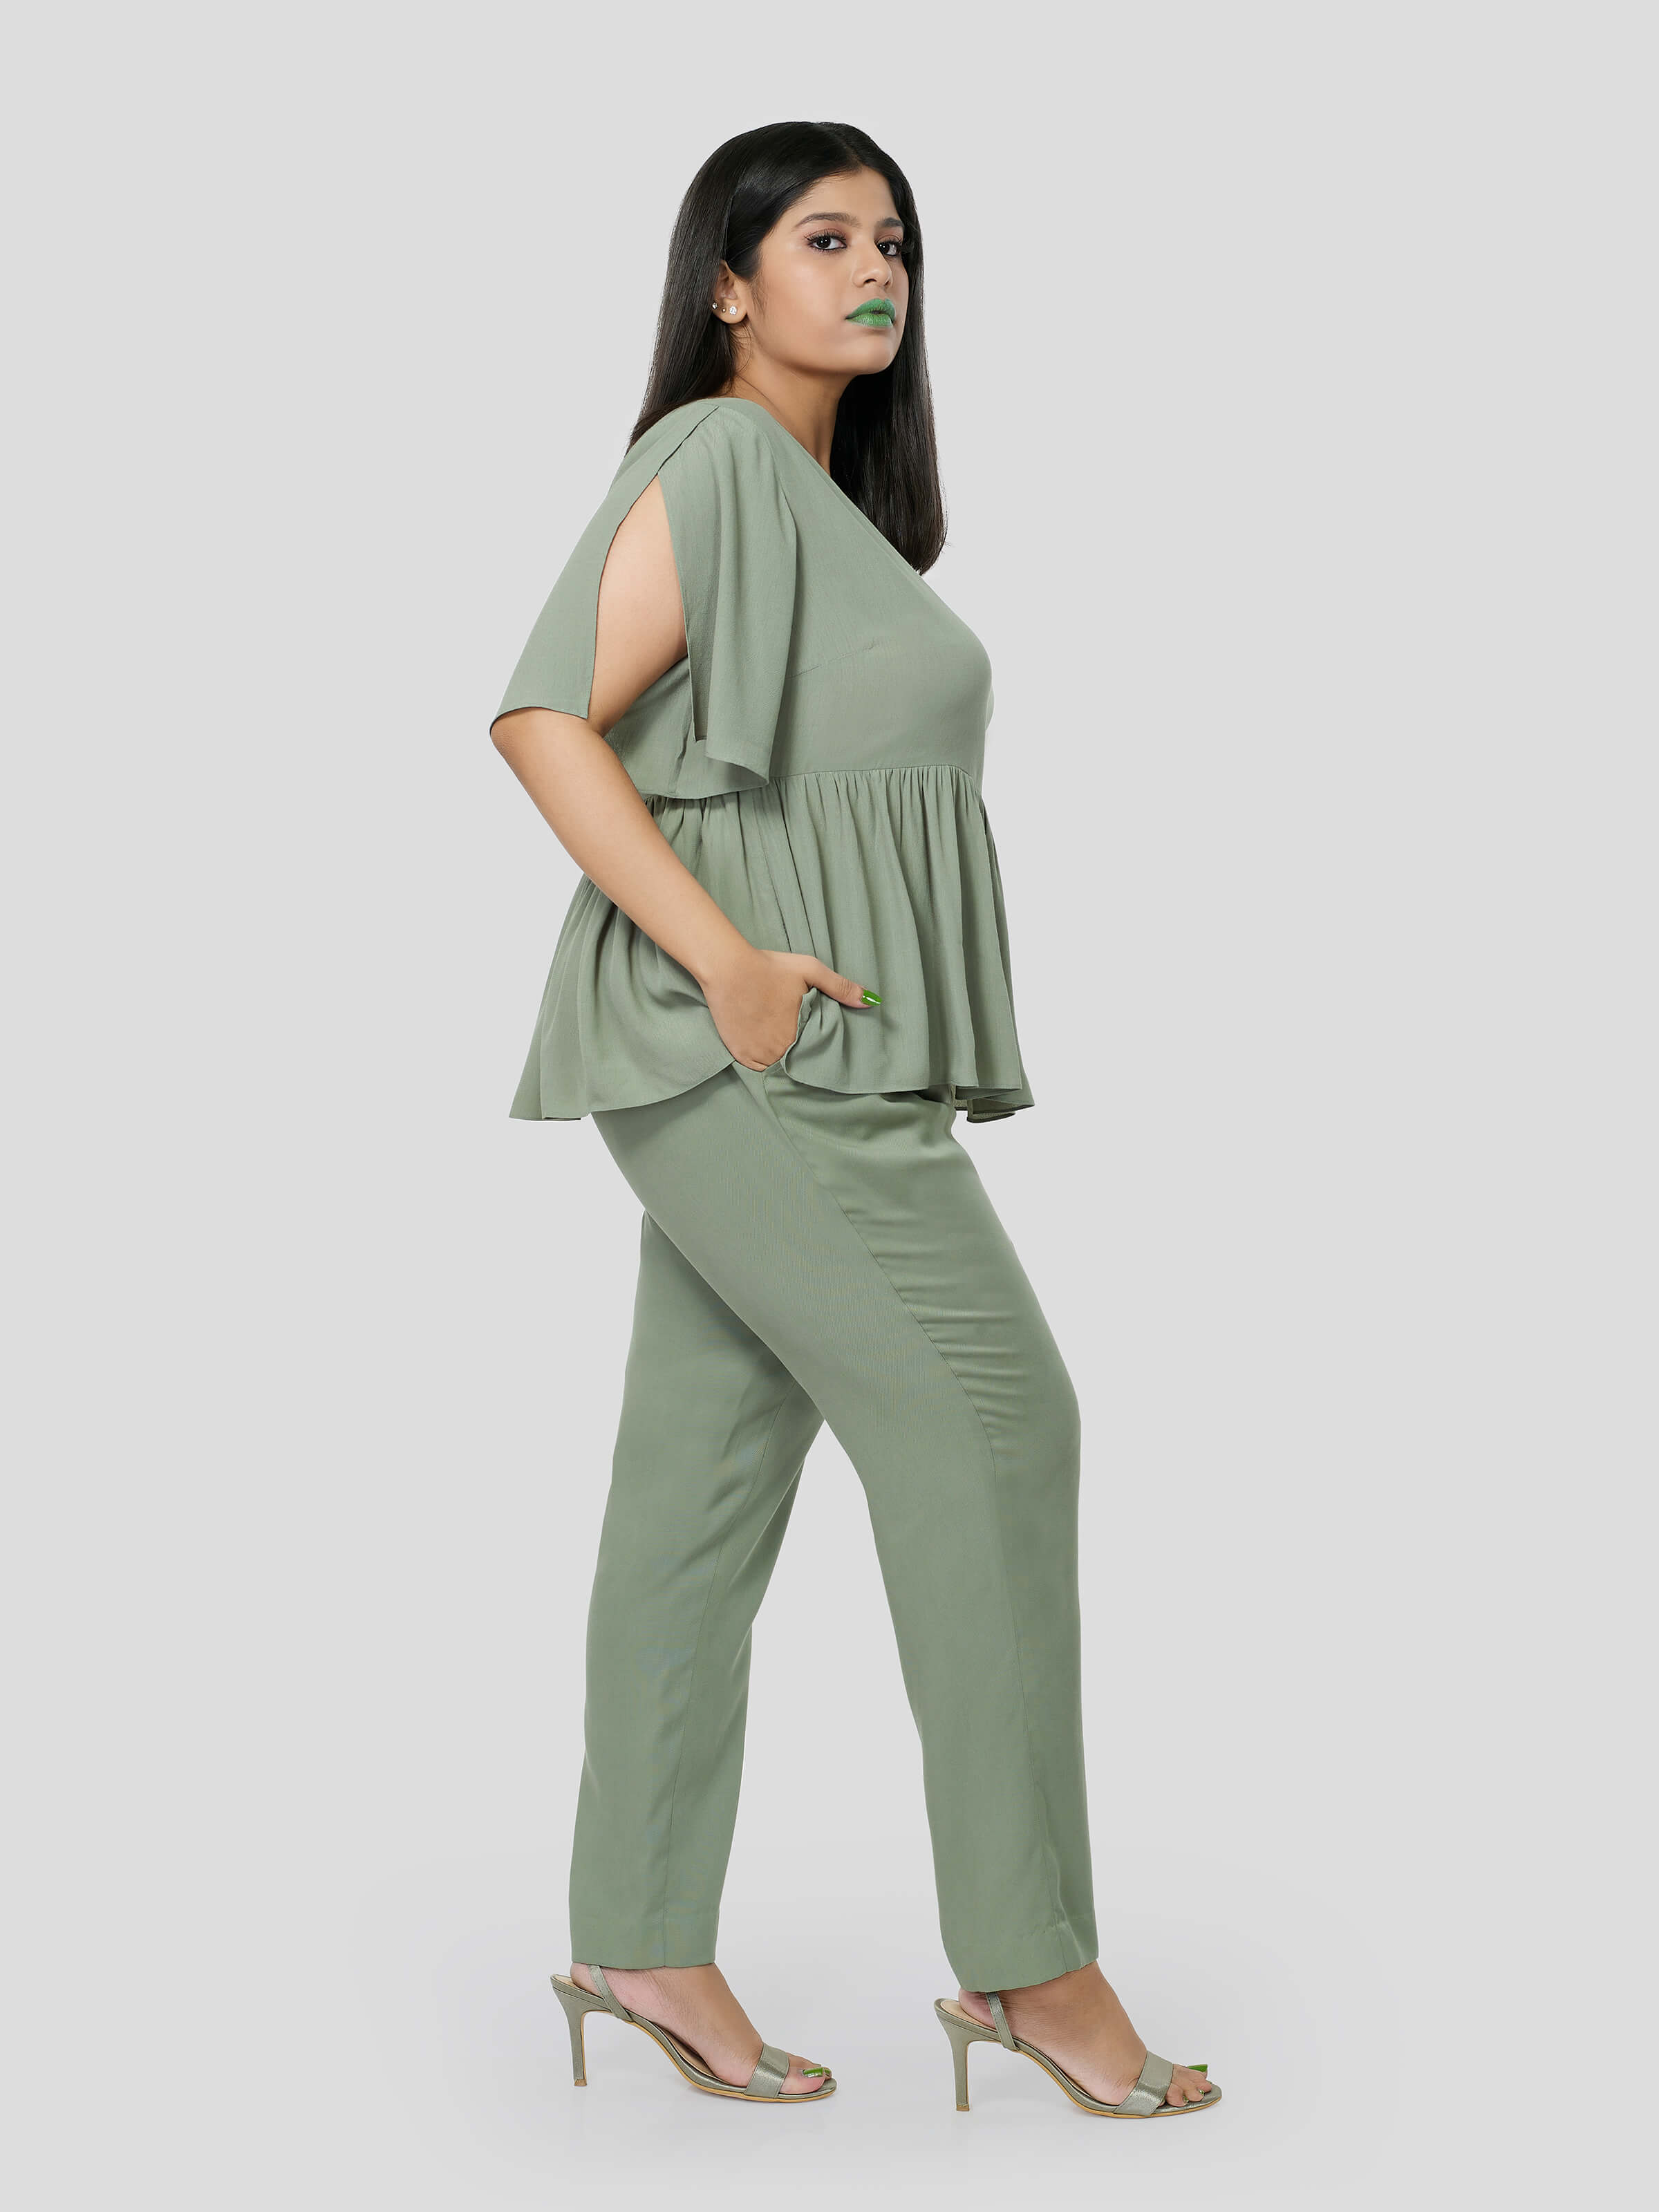 Terrific Harmony  of Flared Top with Narrow Pants - Zest Mélange 